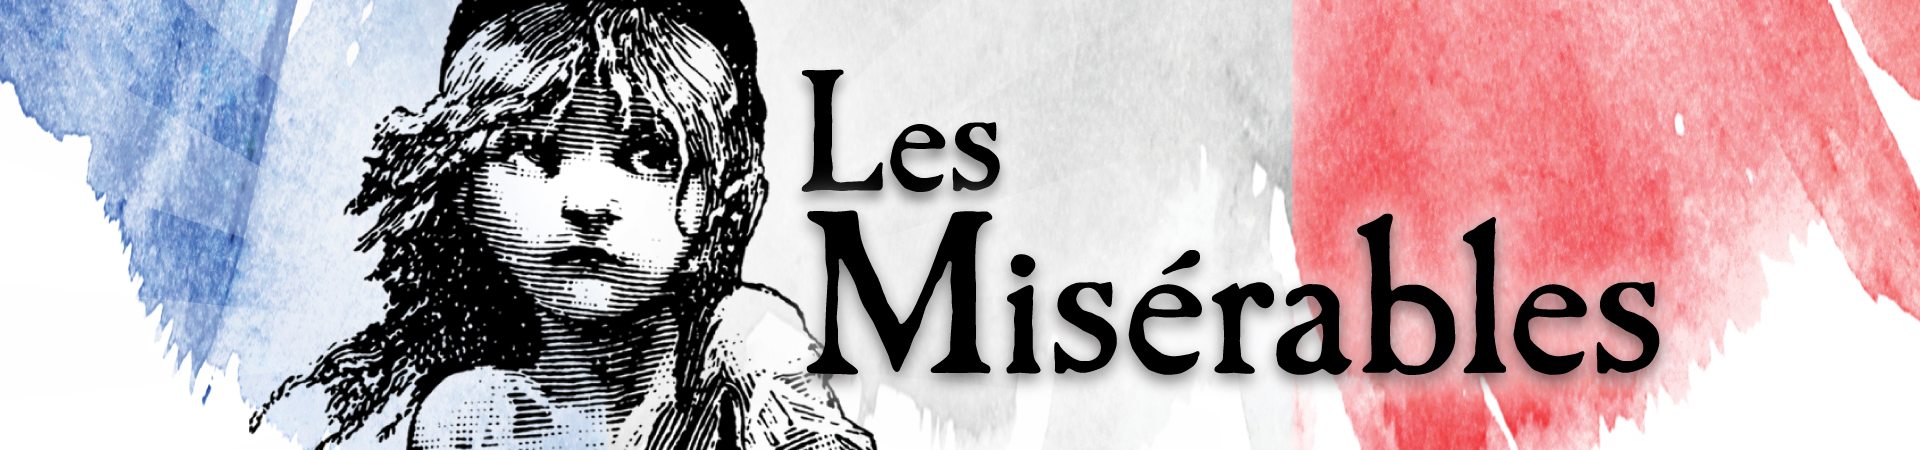 SLider of gray background with newsprint-style French urchin girl, and Frecnh flag colors of red and blue behind her,. Text reads, "Les Miserables."